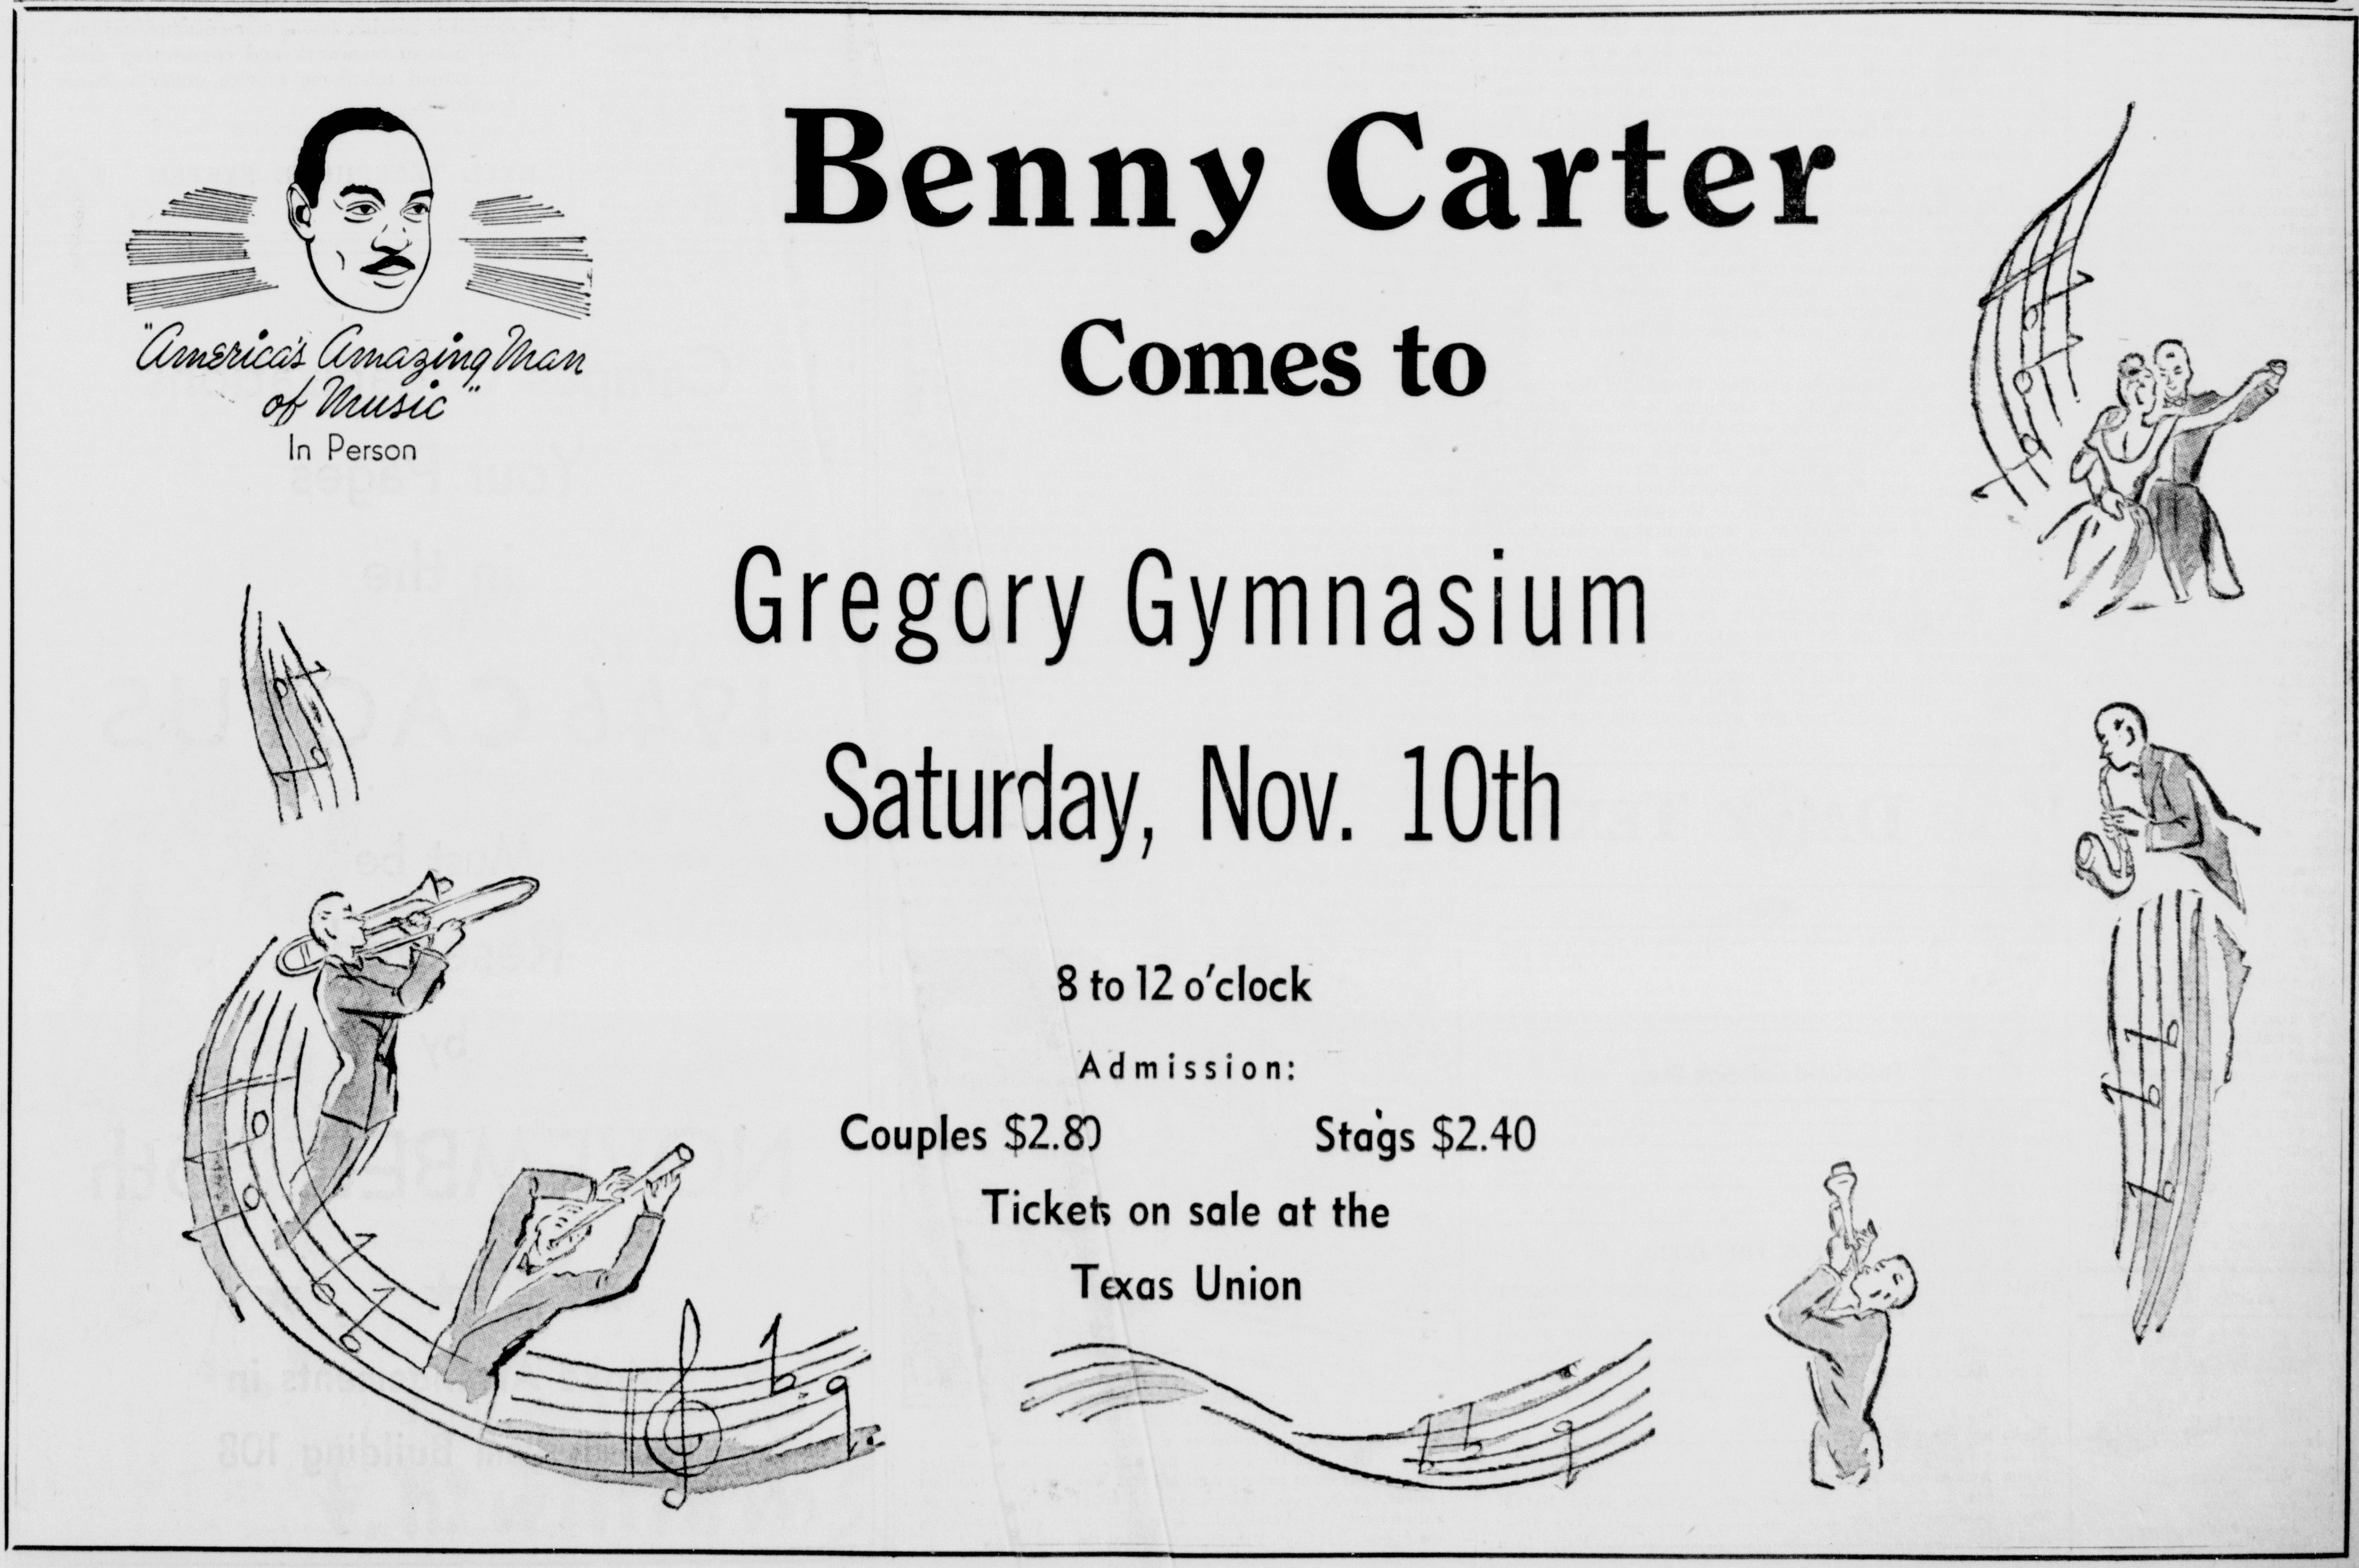 Advertisement for Benny Carter performance at Gregory Gym